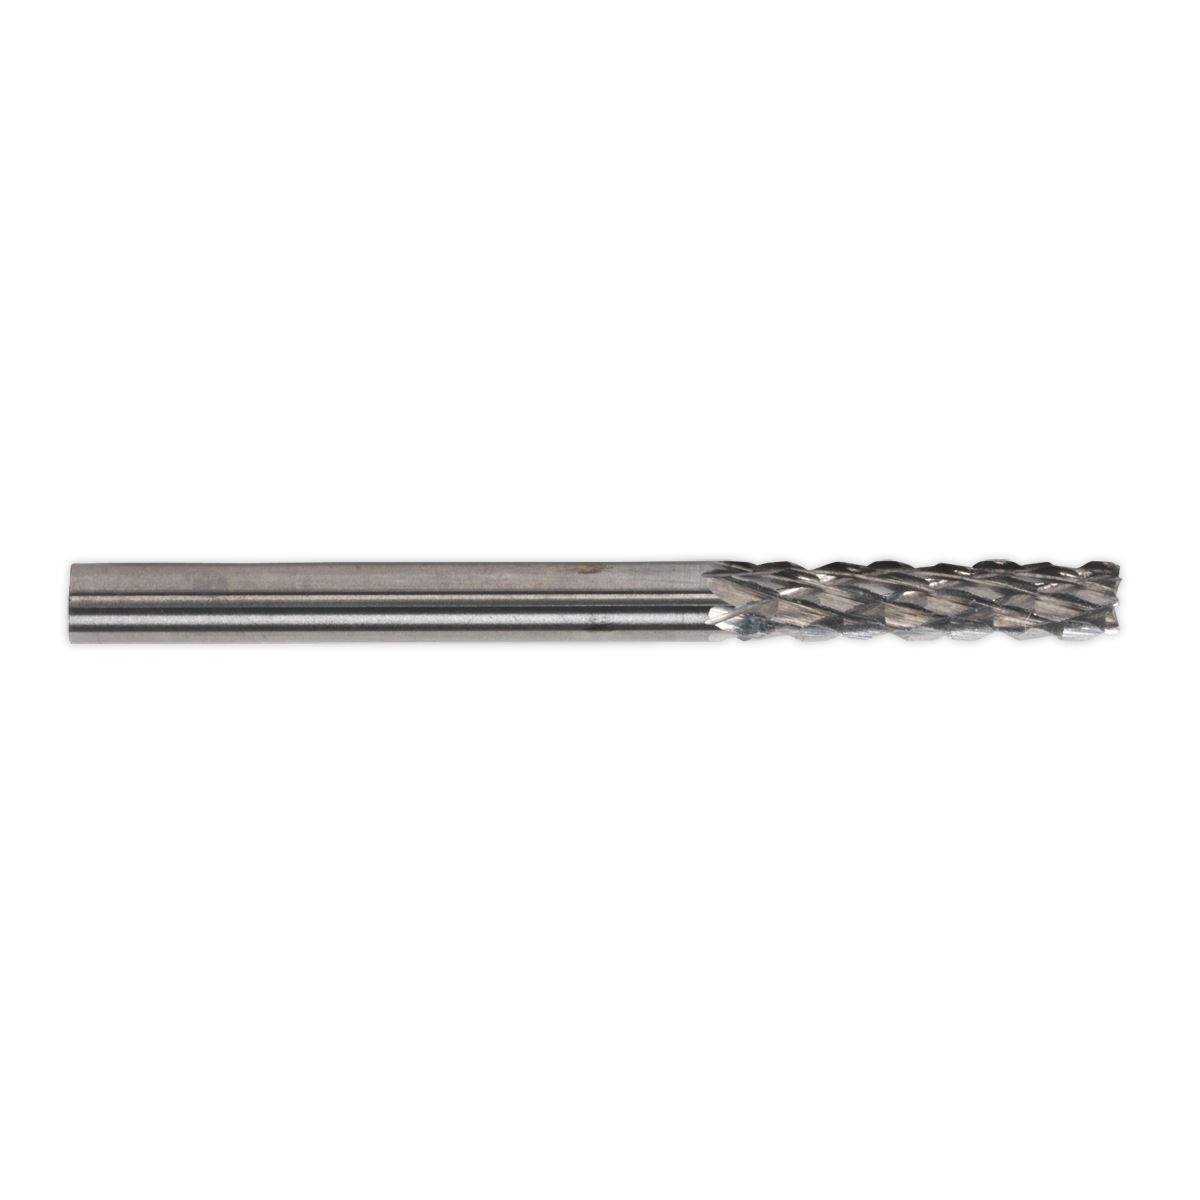 Sealey Micro Carbide Burr Cylinder with End Cutter 3mm Pack of 3